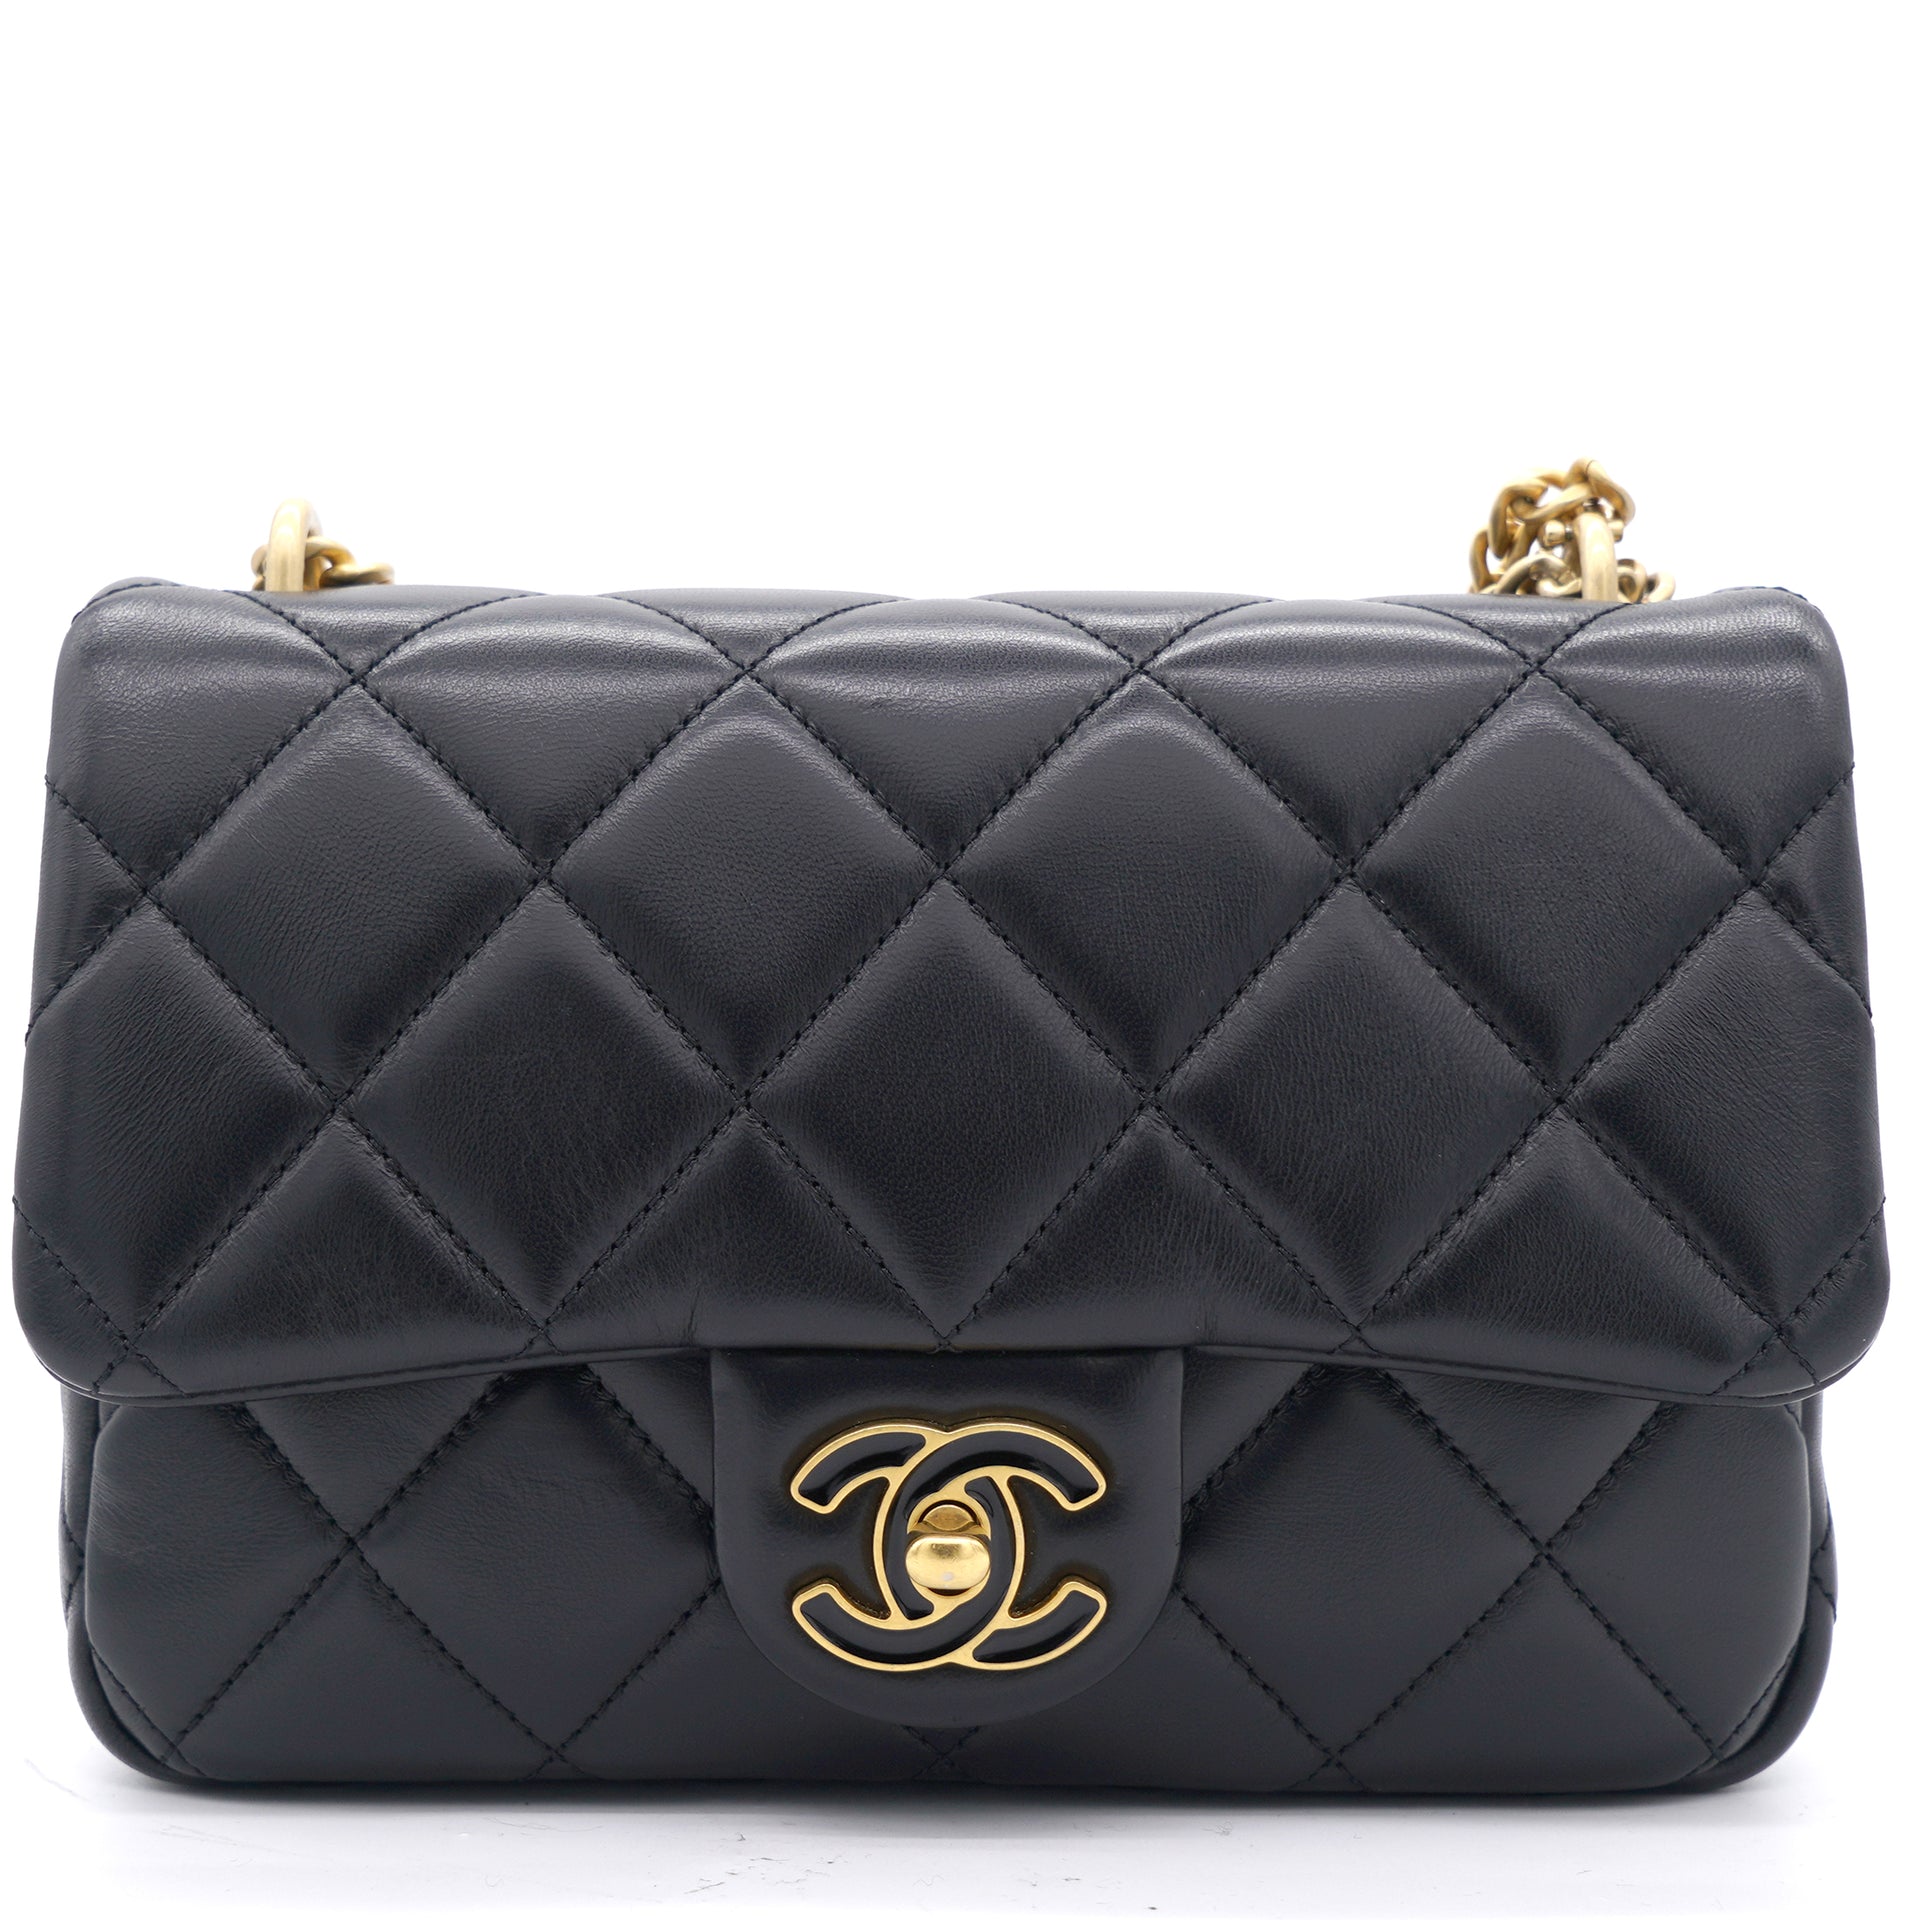 Close-up shots of the Chanel mini classic flap with top handle 